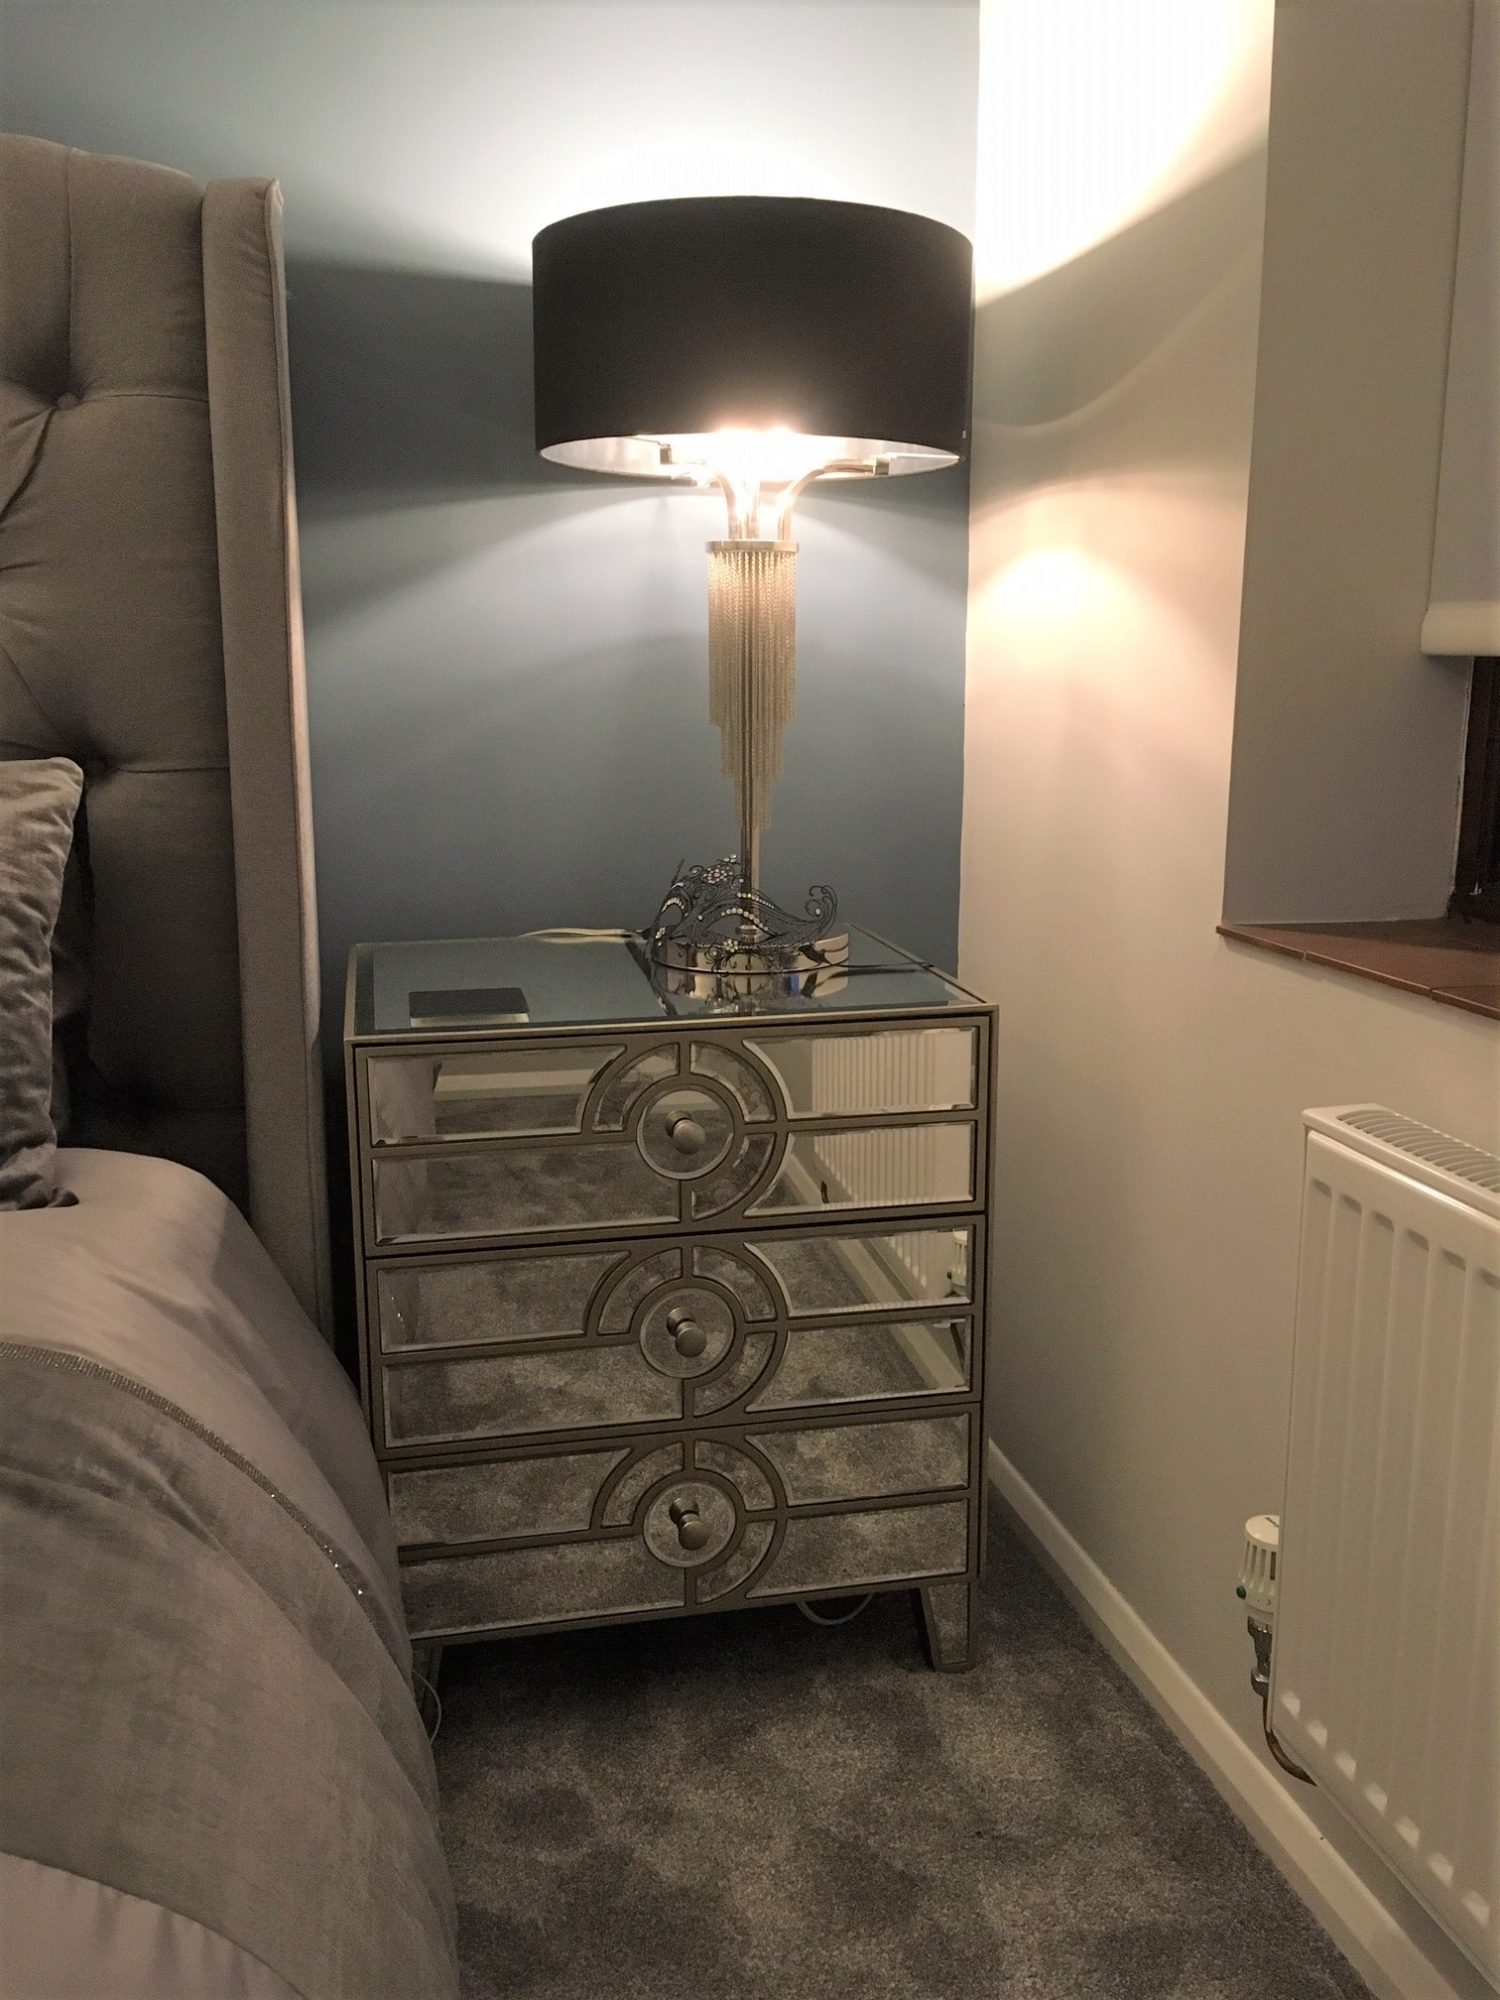 Mirrored Bedside Cabinet with Black and Chrome Lamp